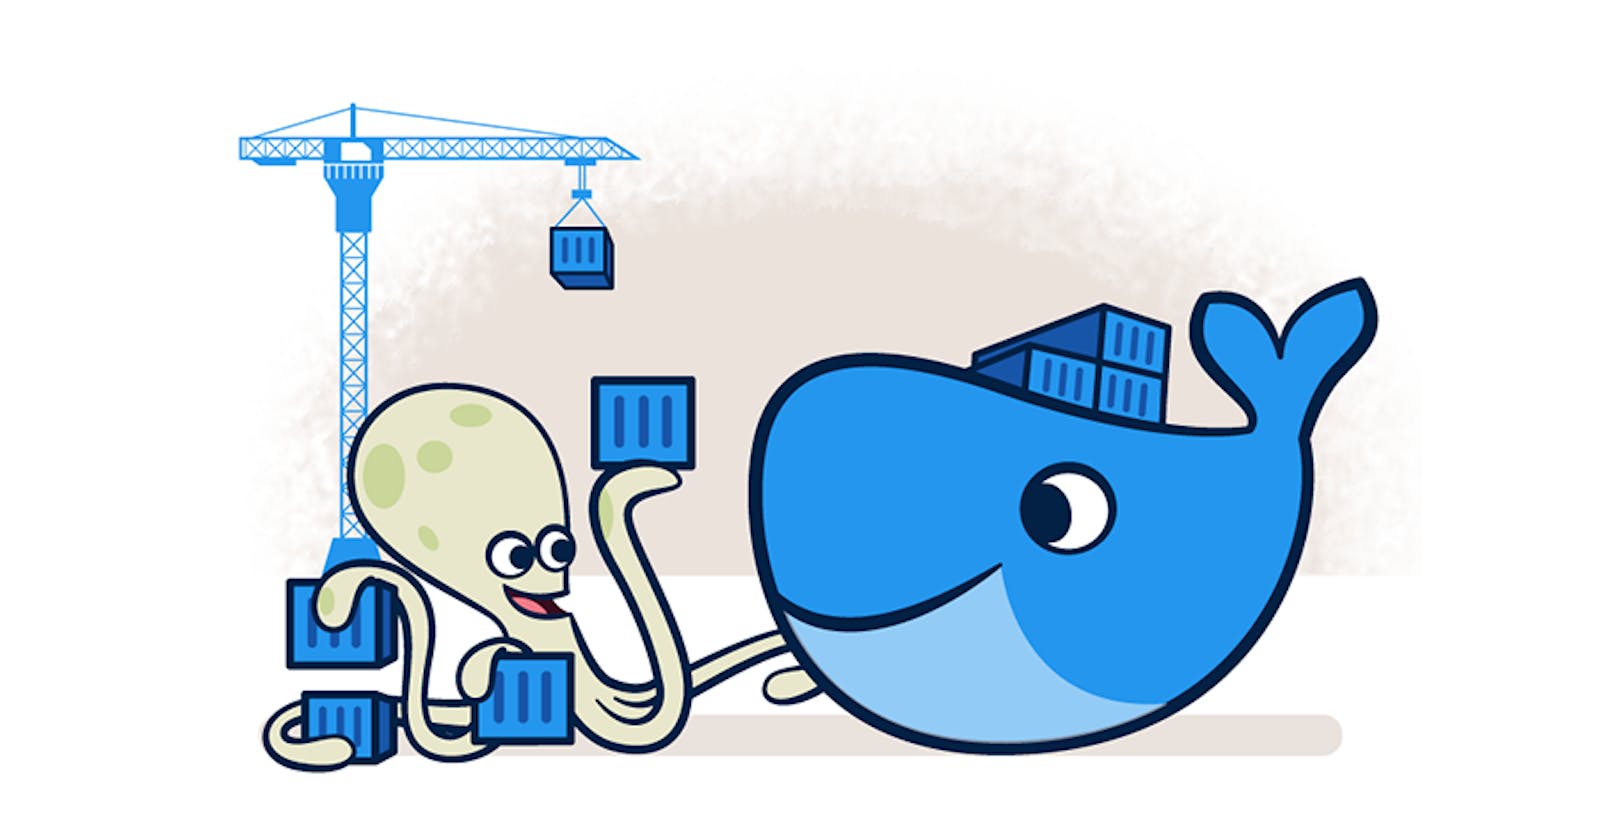 All you need to know about Docker